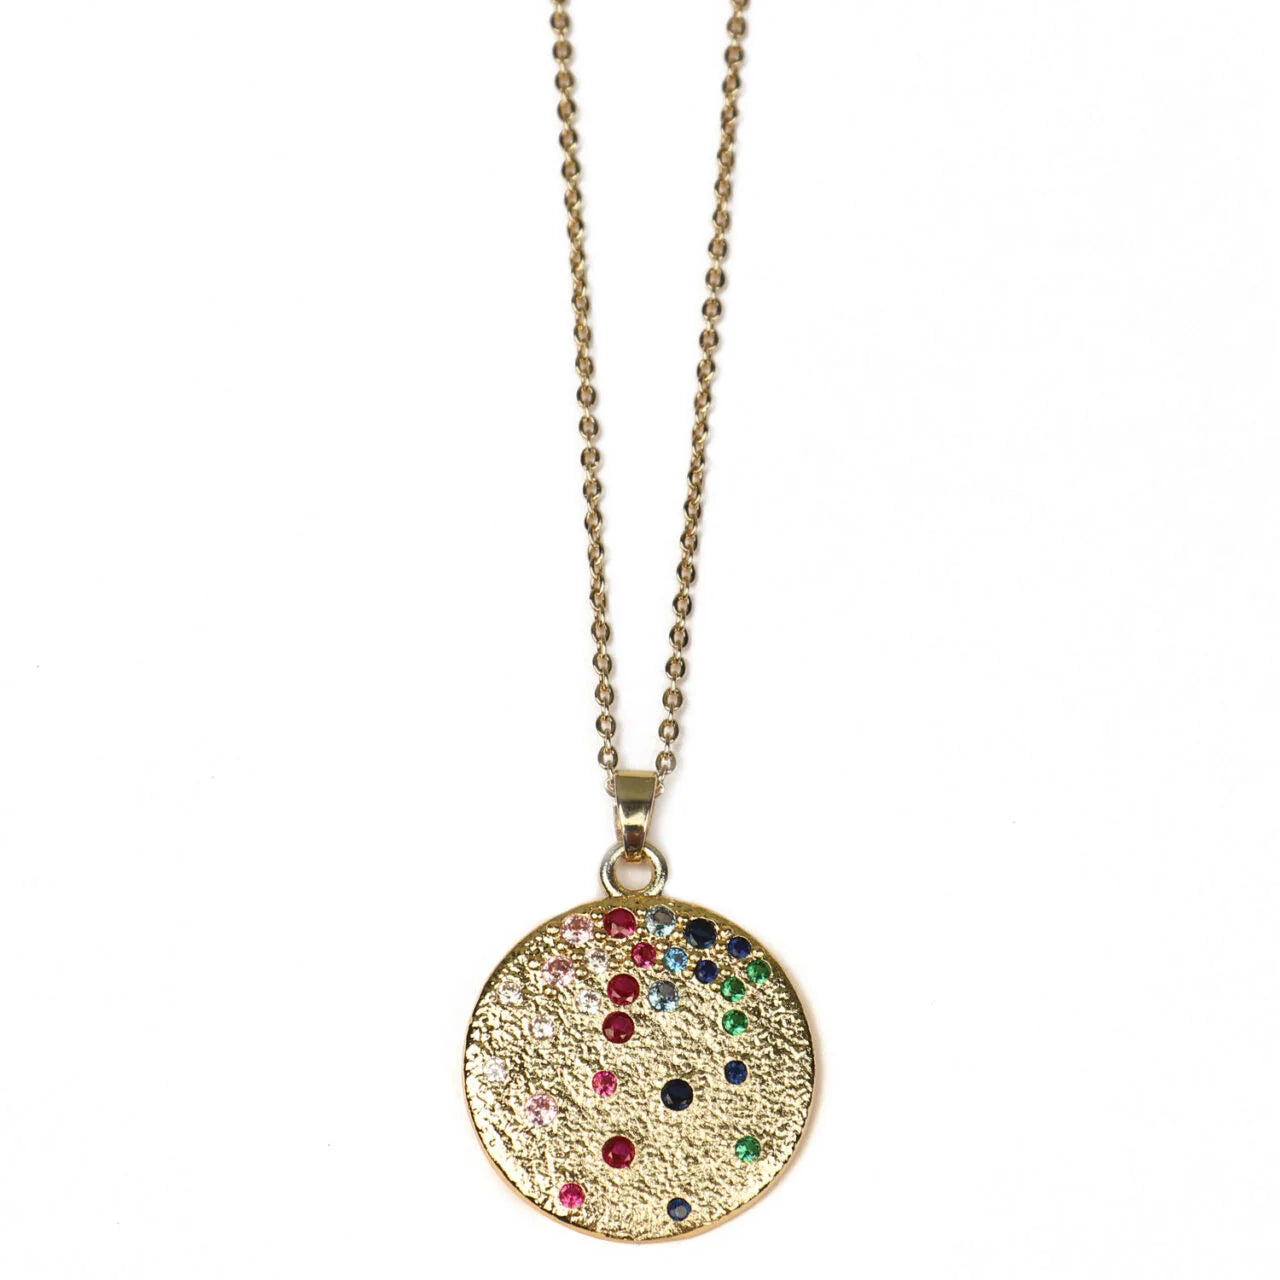 Fabulous Gifts Jewellery Necklace Multi Stone Gold by Weirs of Baggot Street